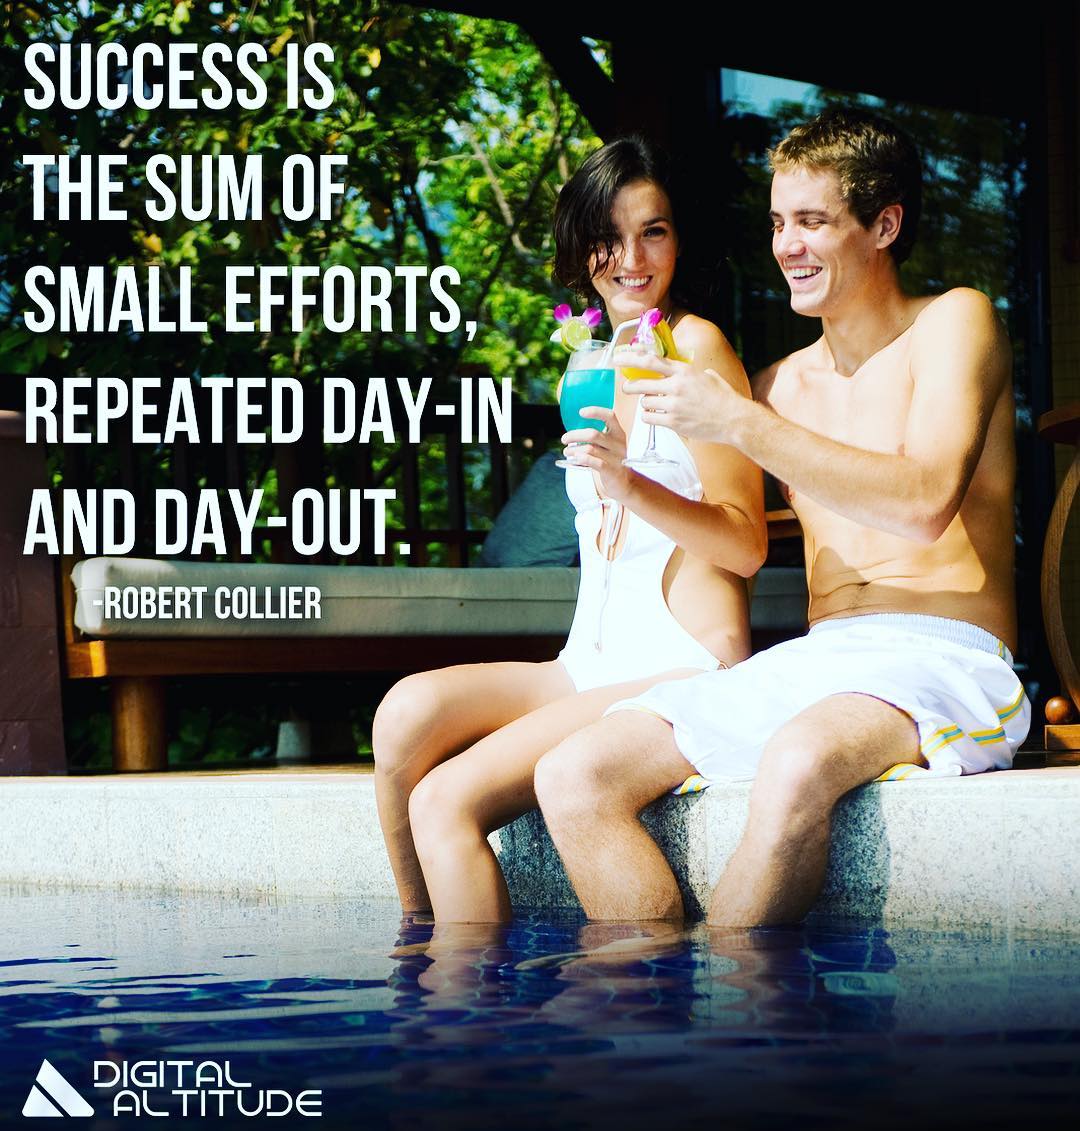 Success is the sum of small efforts - repeated day in and day out. - Robert Collier